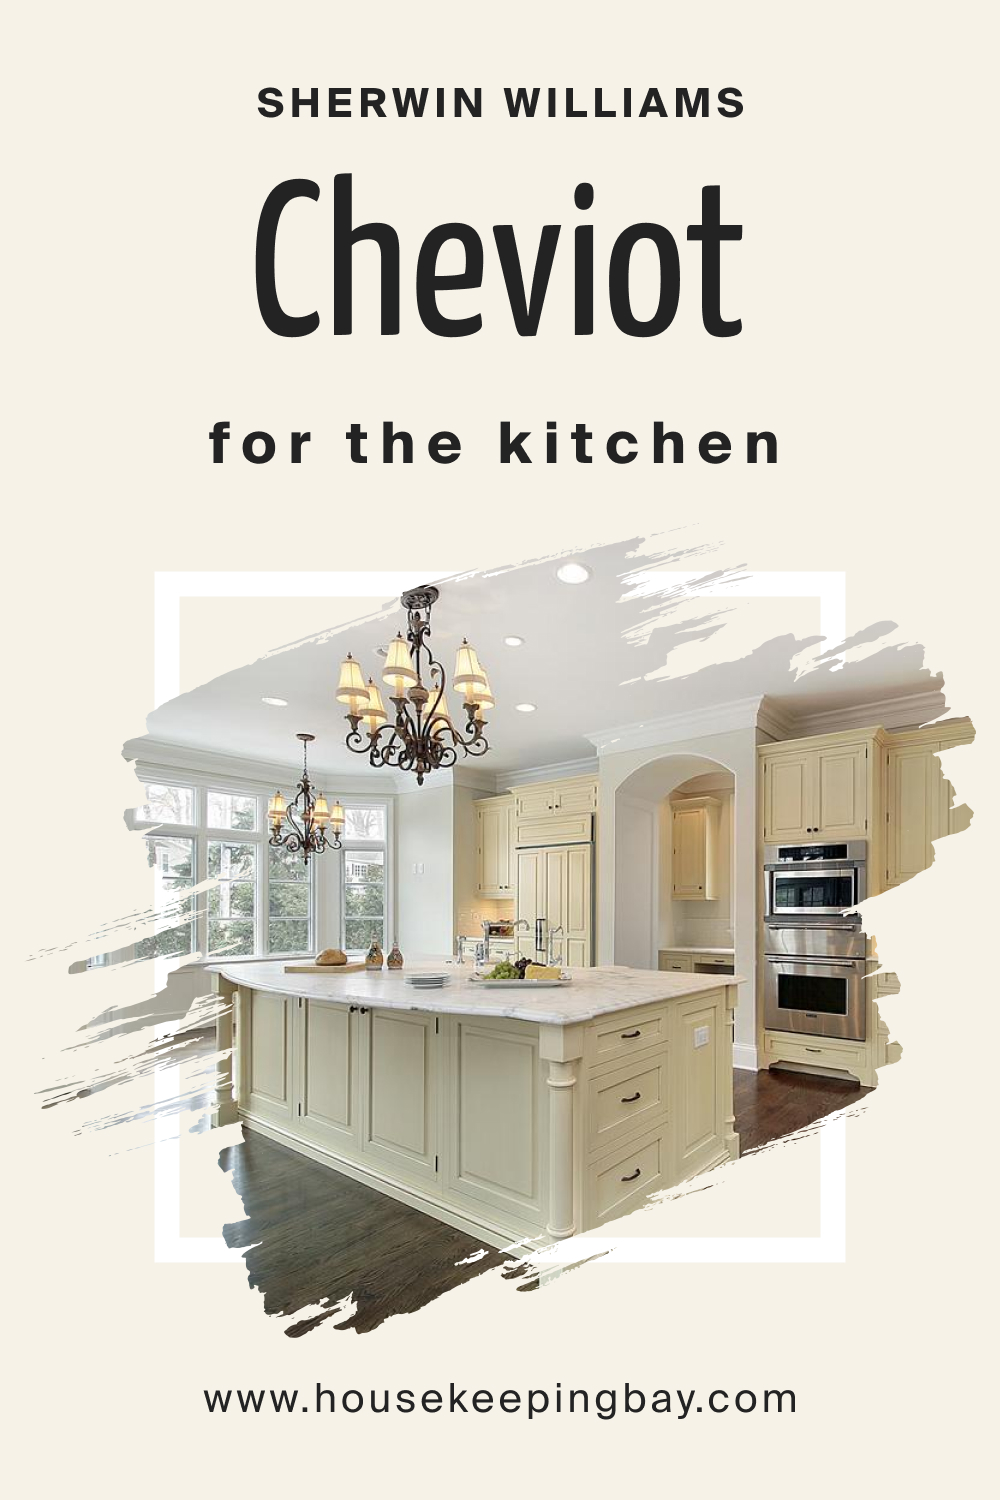 Sherwin Williams. SW 9503 Cheviot For the Kitchens